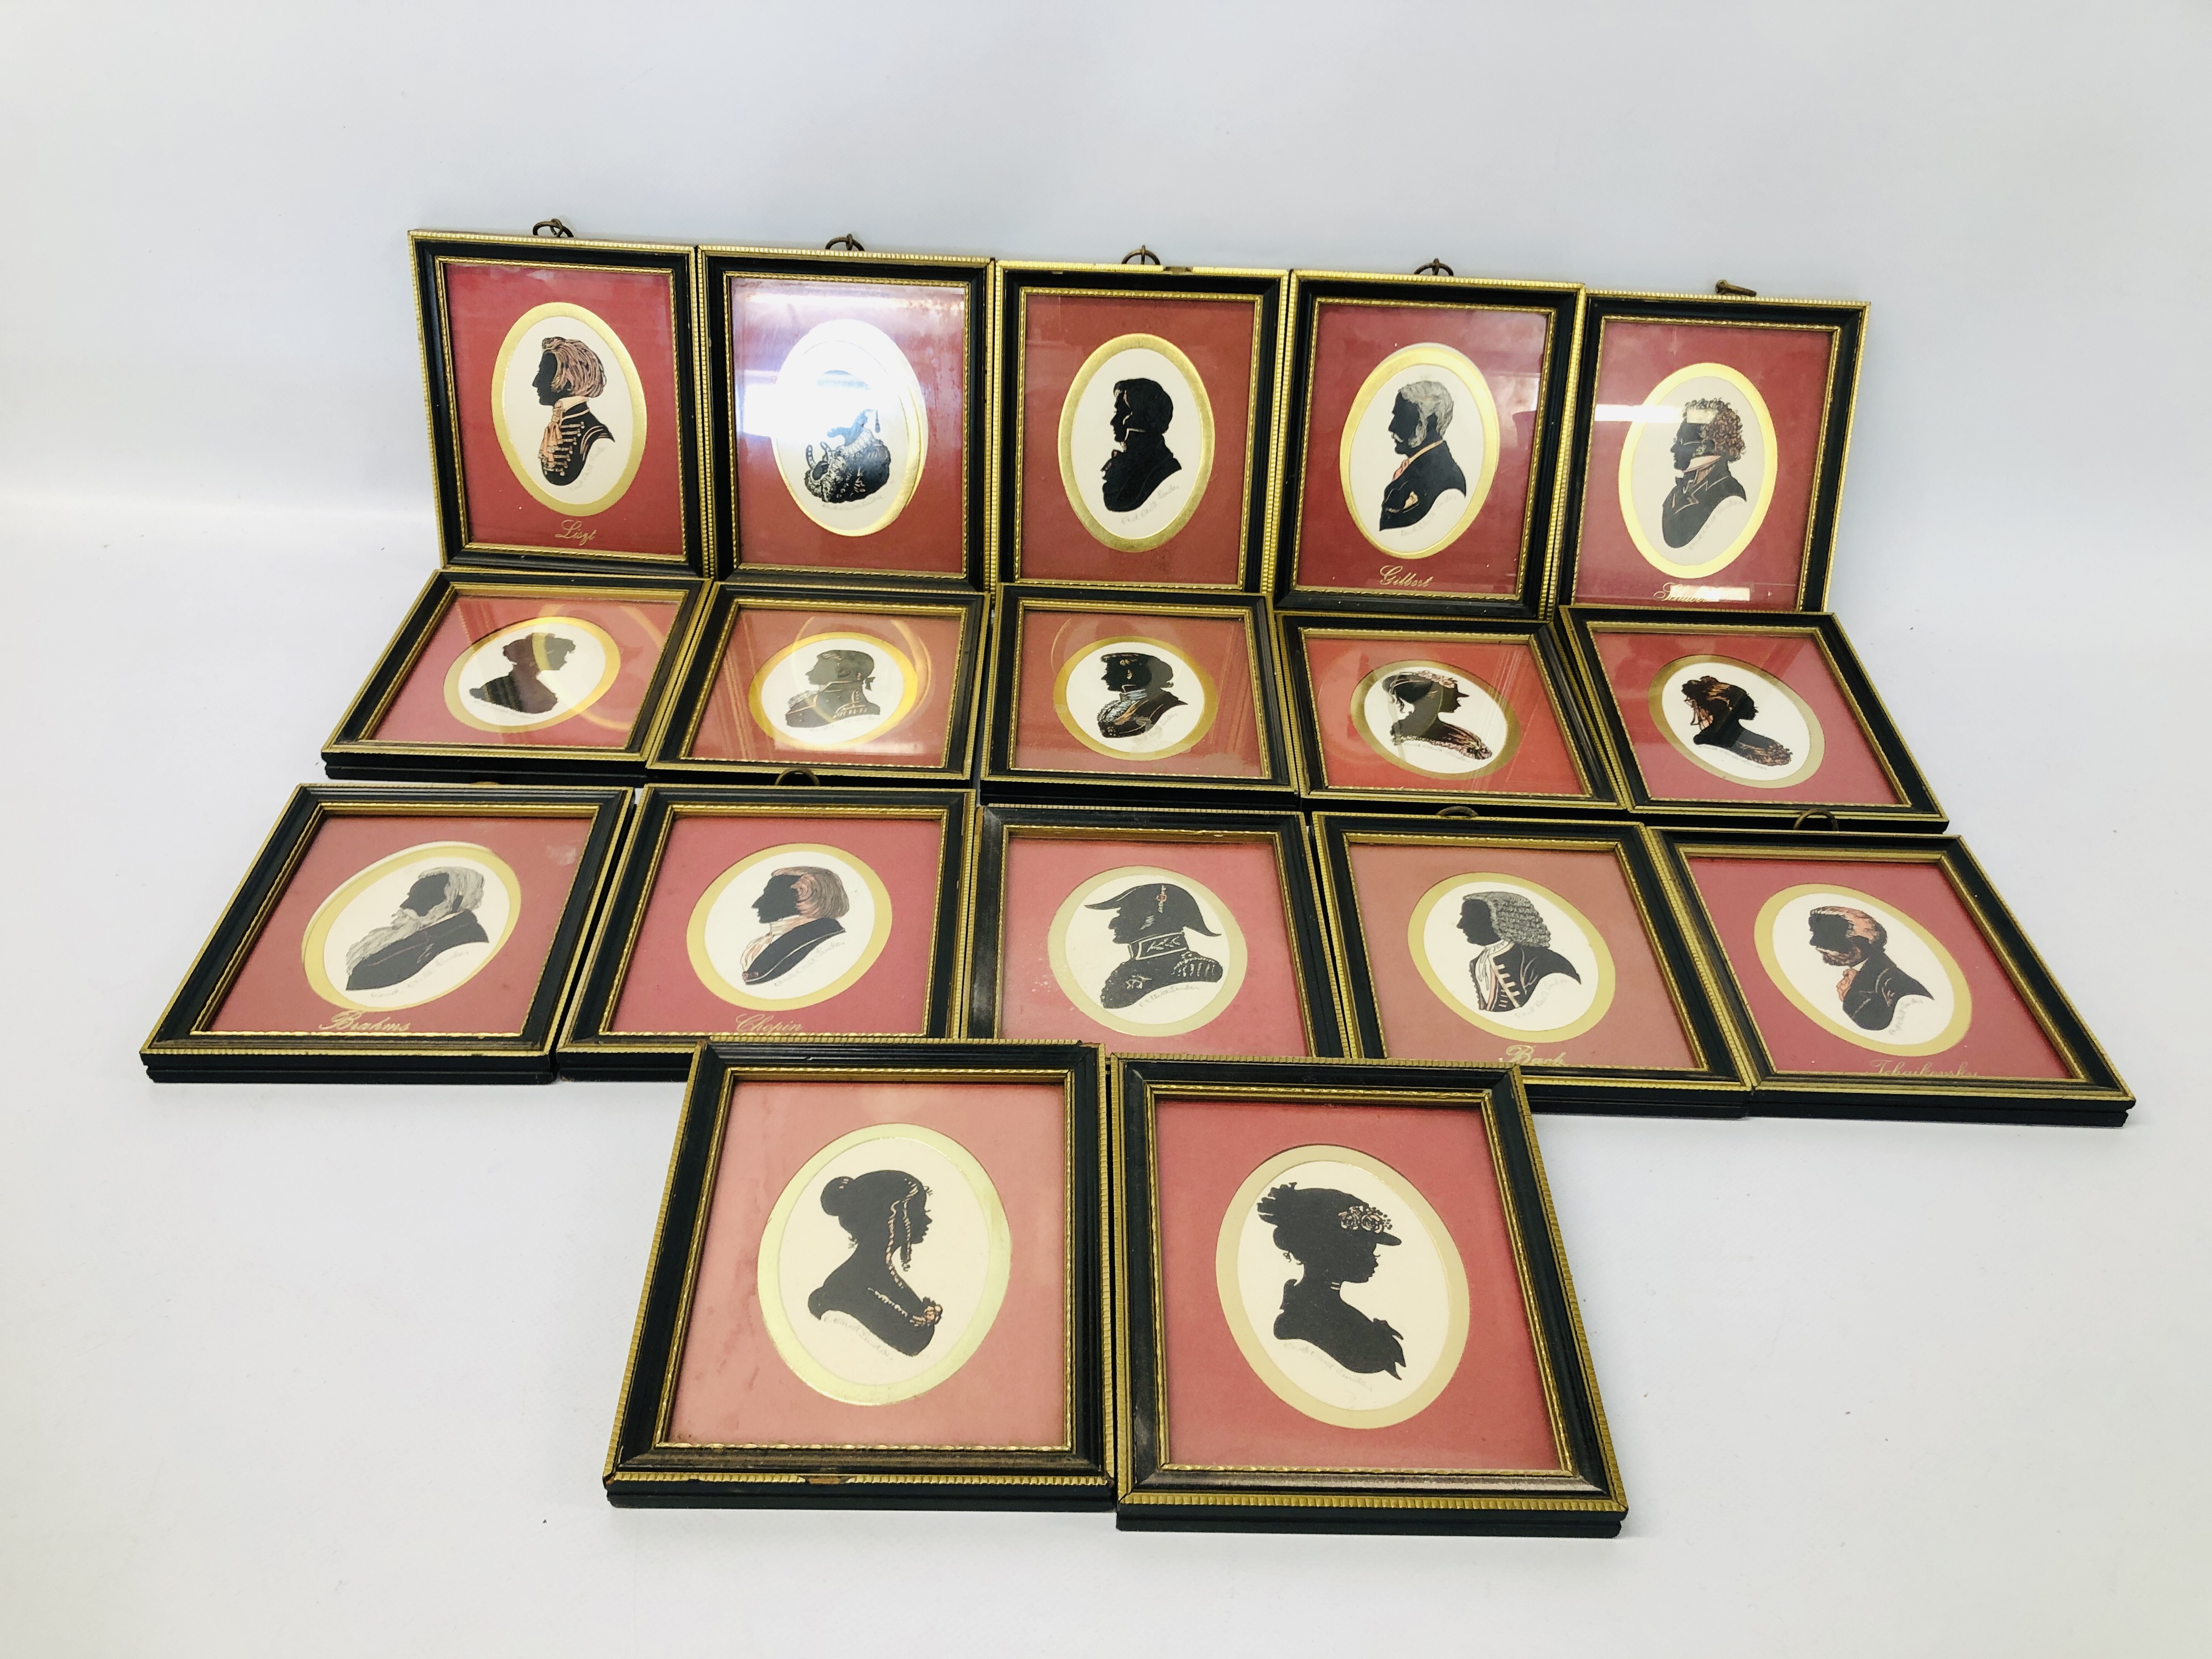 COLLECTION OF 17 "THE PENNYFARTHING GALLERIES" FRAMED SILHOUETTES